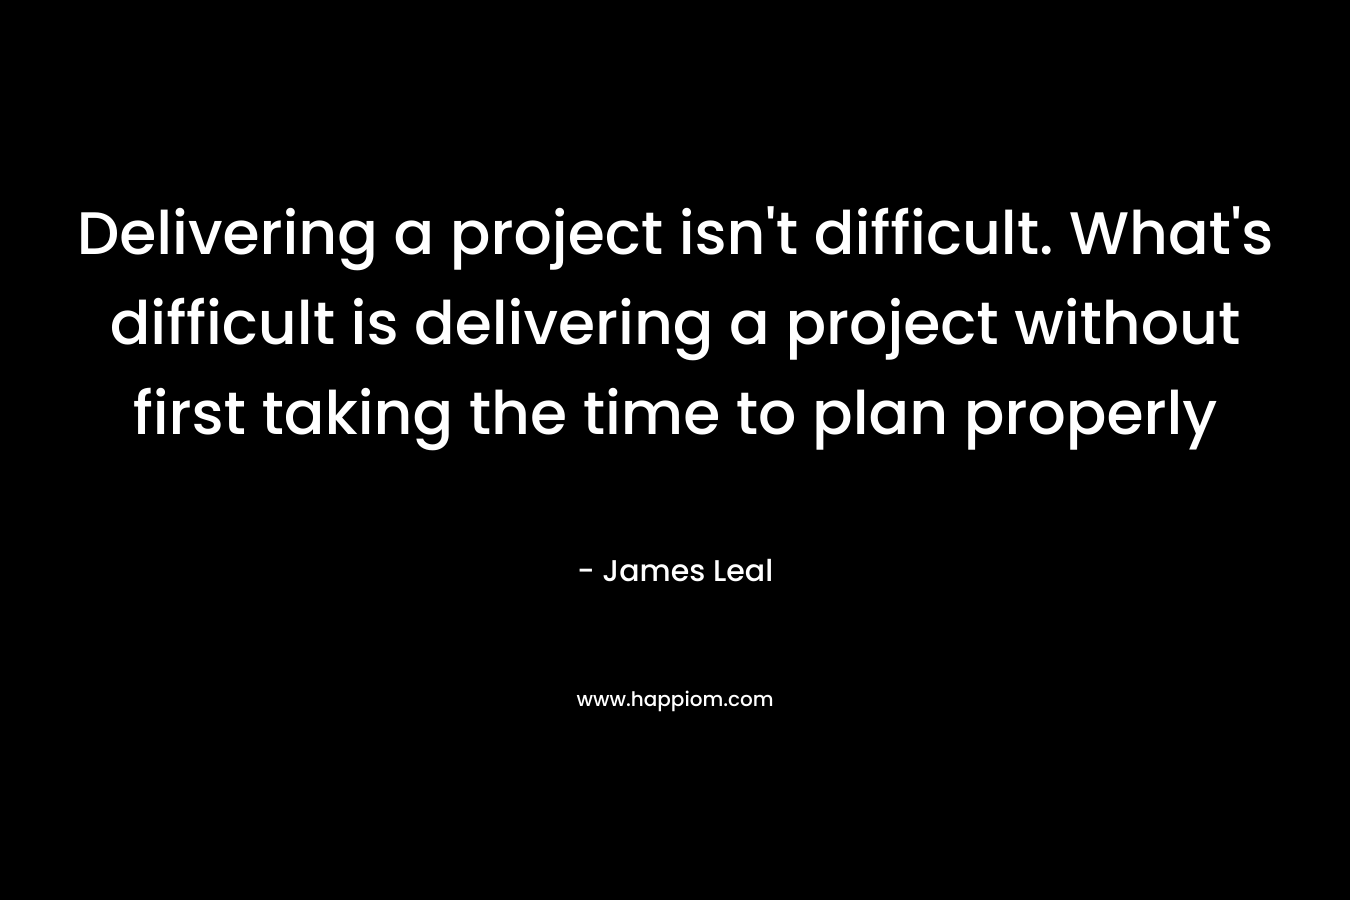 Delivering a project isn’t difficult. What’s difficult is delivering a project without first taking the time to plan properly – James Leal